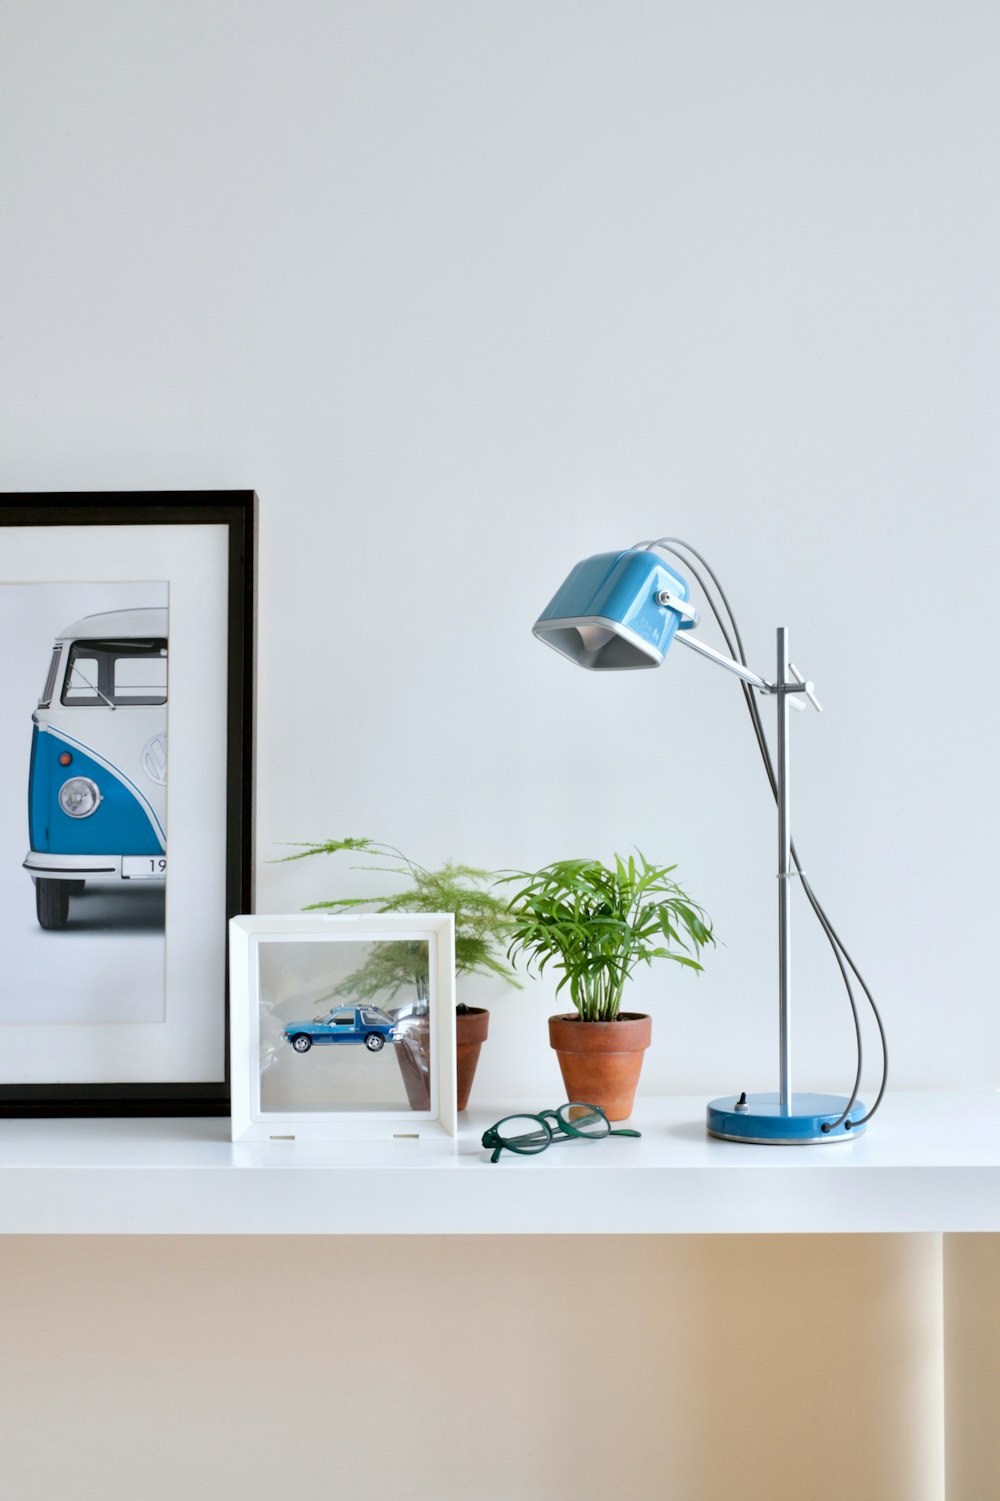 a picture of a vw bus on a shelf next to a lamp and a